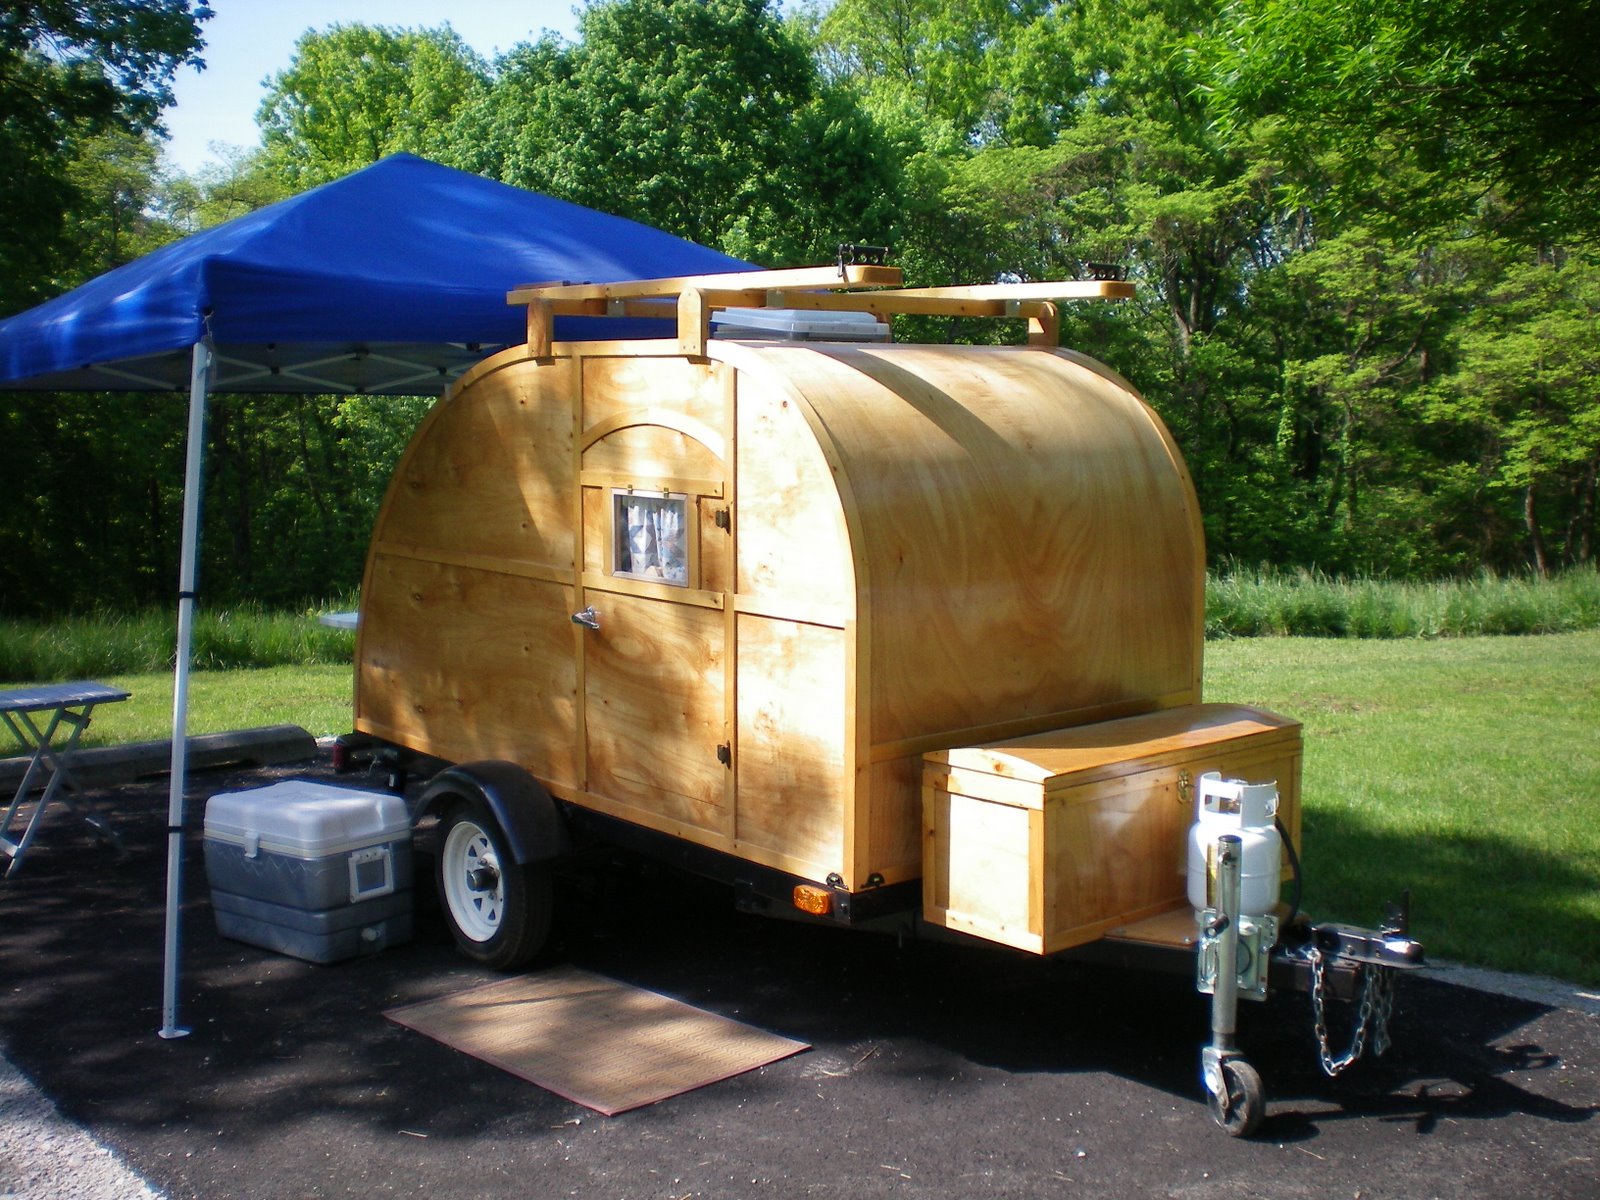 [Camping+Pictures+170.jpg]